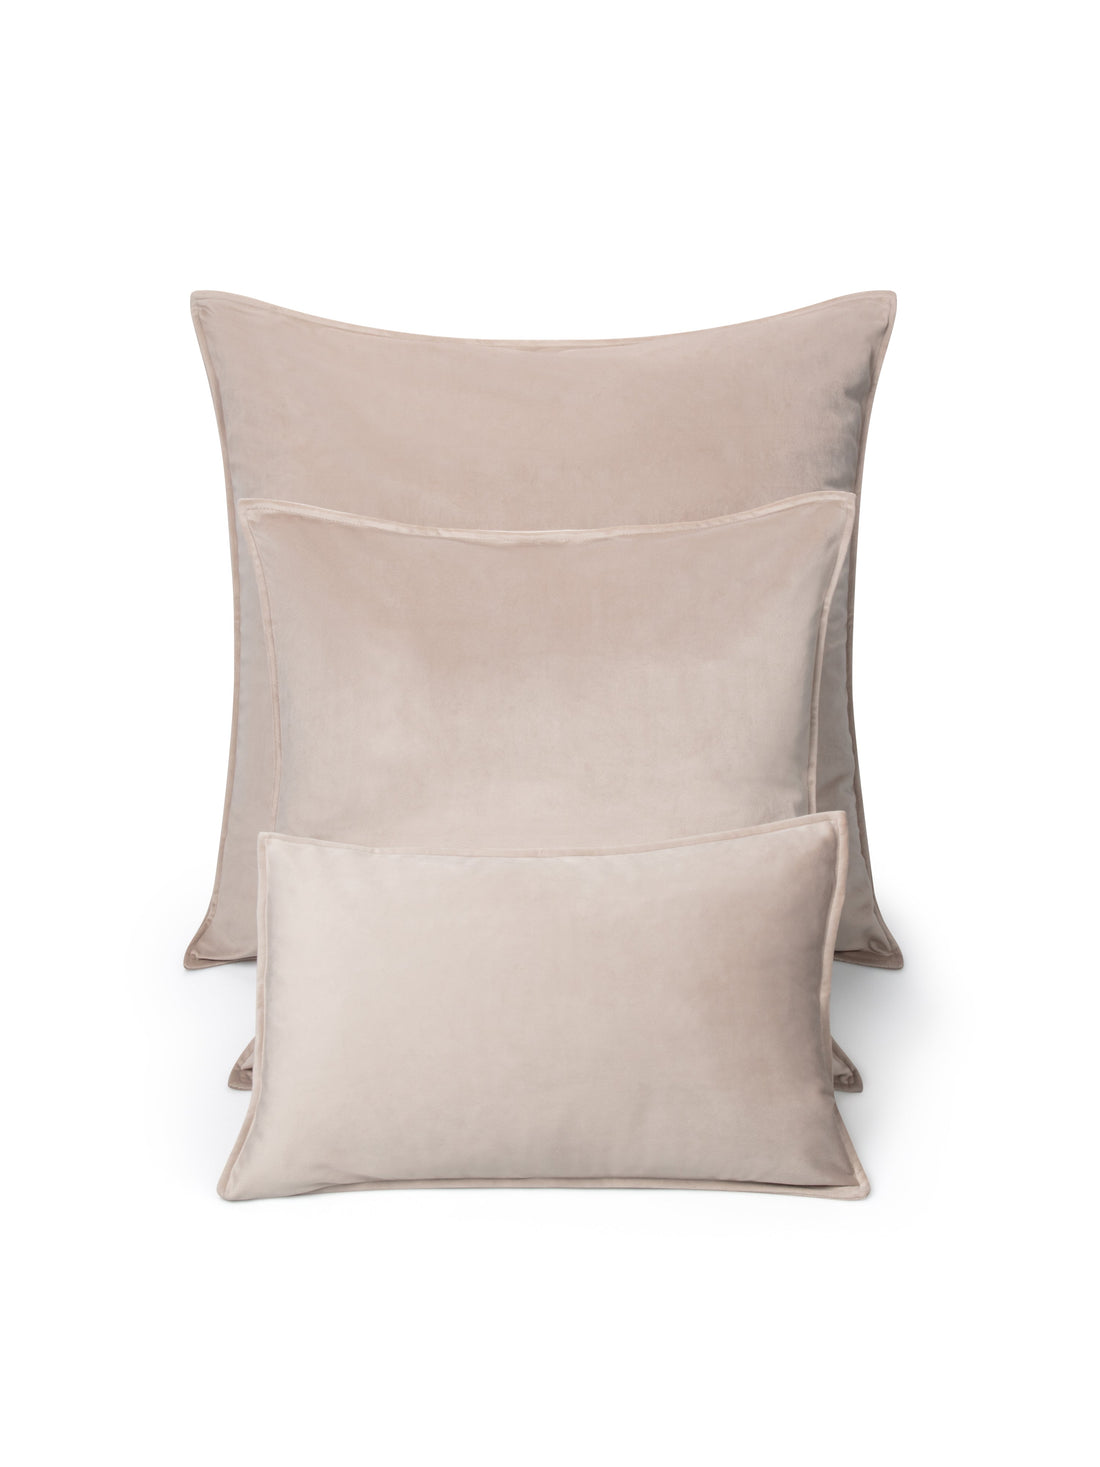 Luxurious mouse-colored velvet cushion with feather insert by Chalk, perfect for a neutral and stylish home aesthetic.